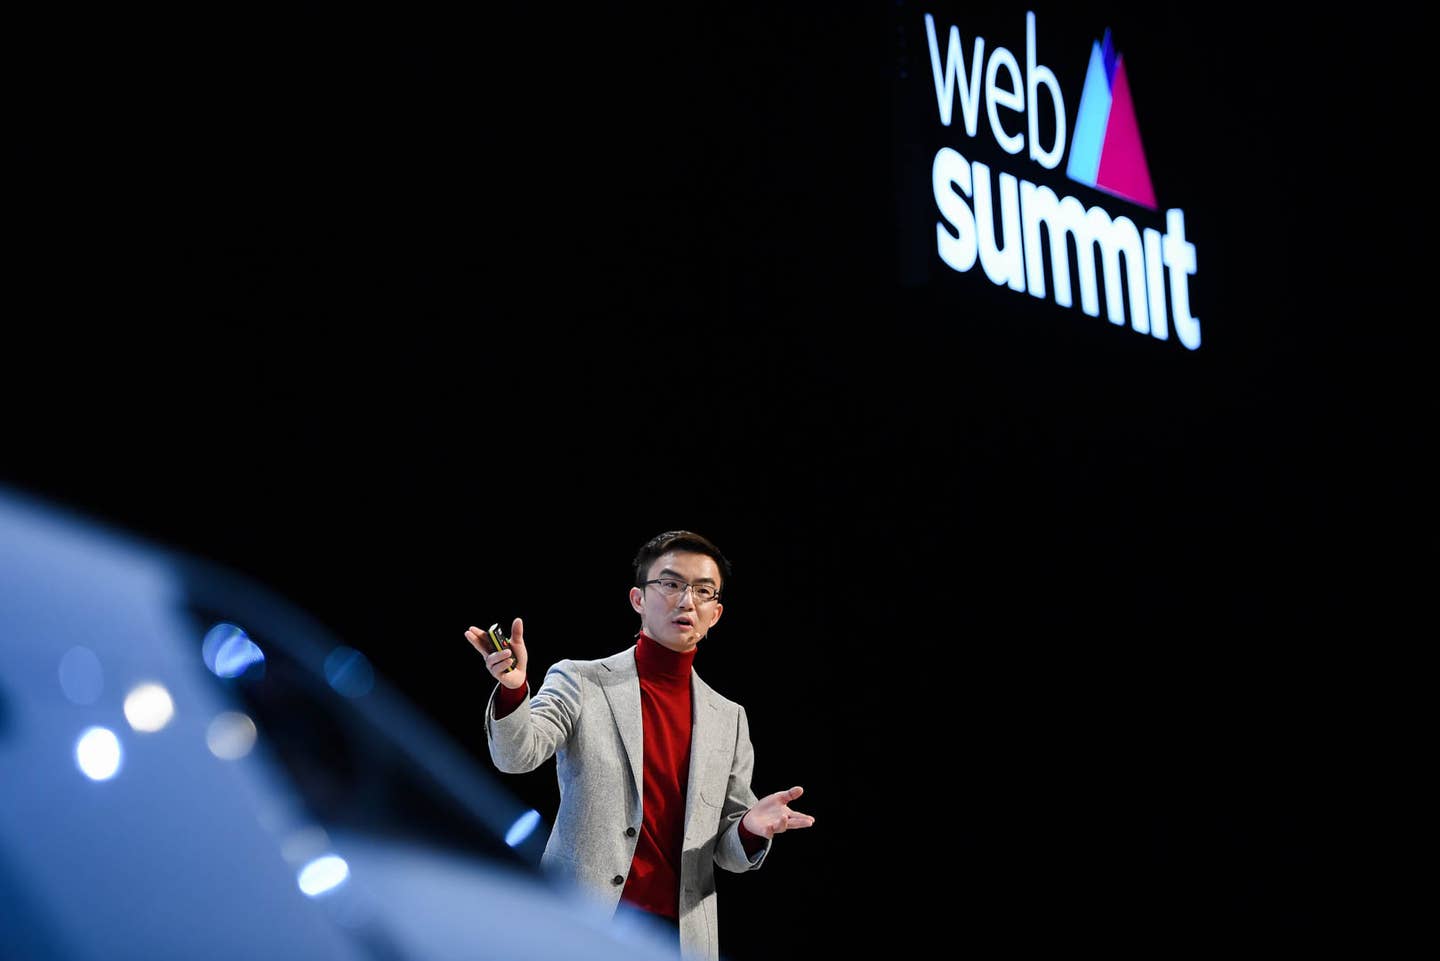 TuSimple founder and CEO Xiaodi Hou | (Photo By Harry Murphy/Sportsfile for Web Summit via Getty Images)